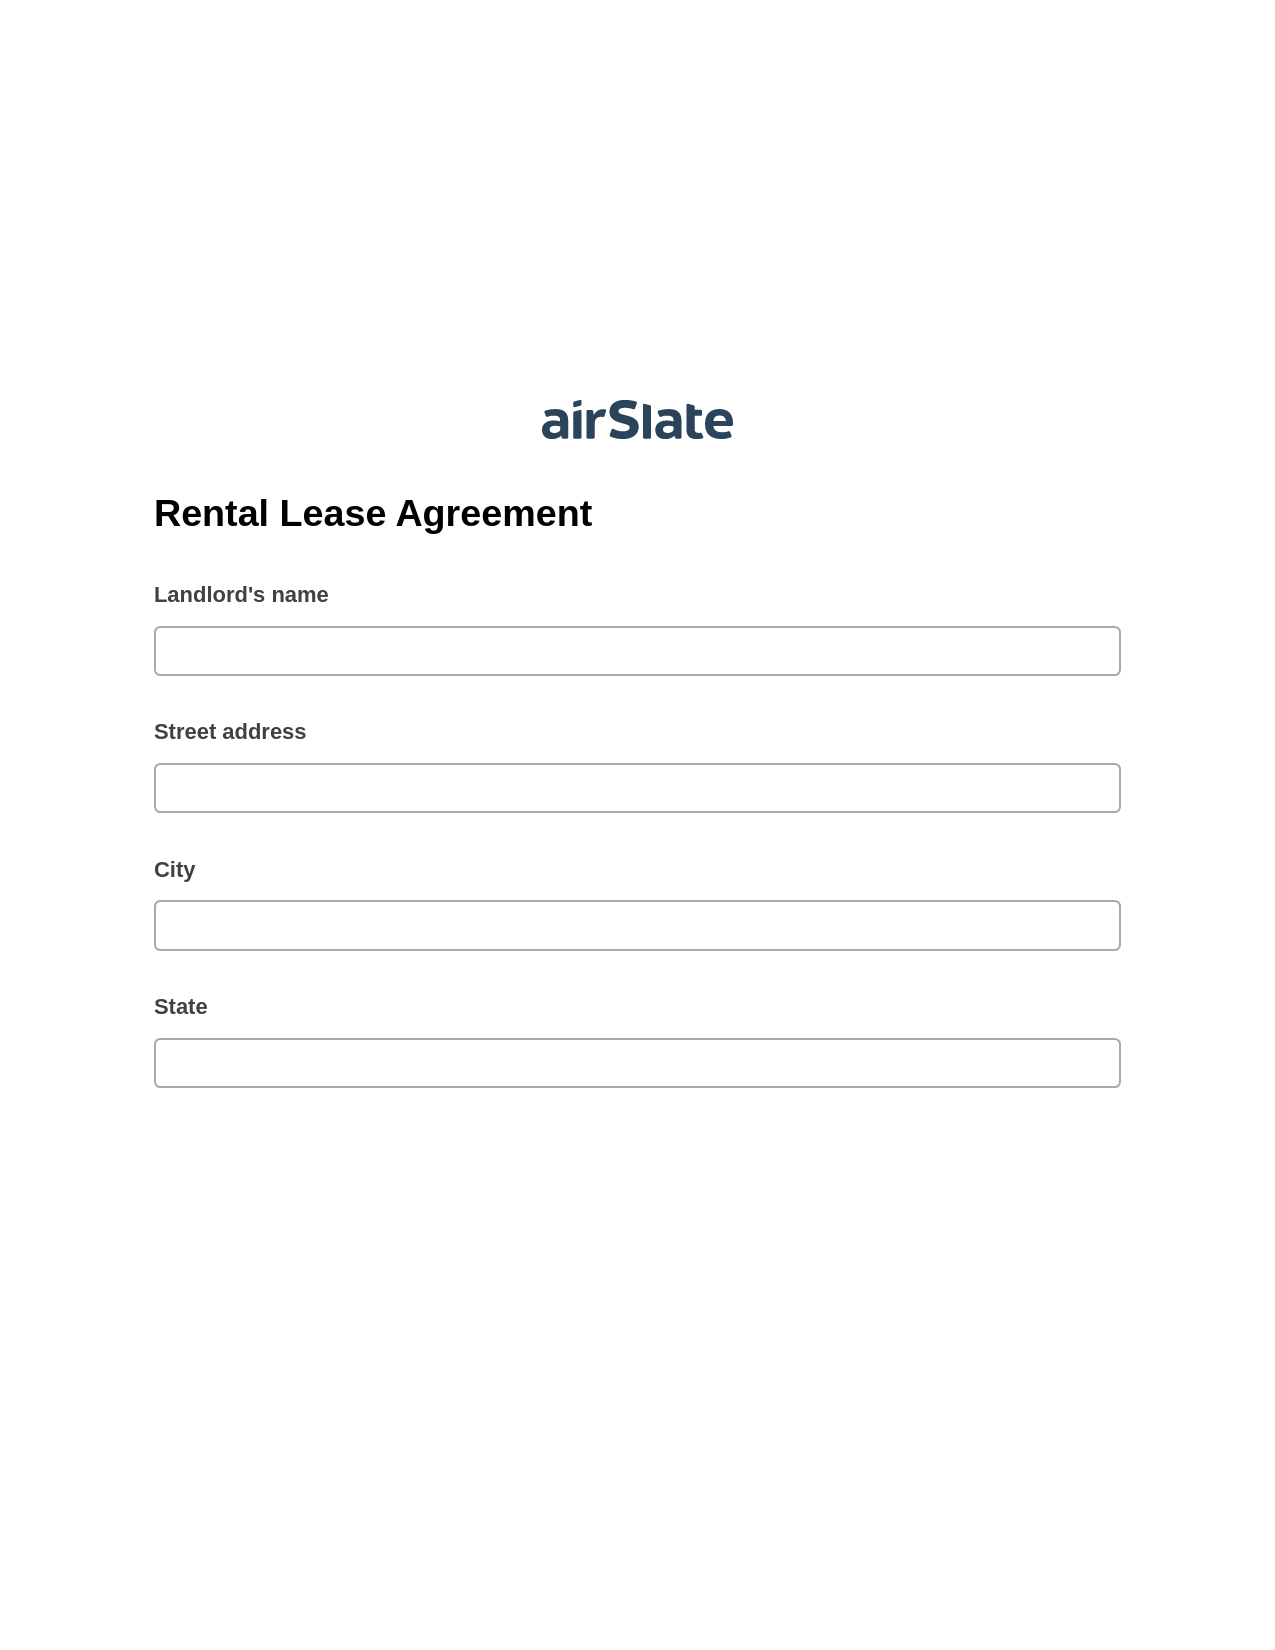 Rental Lease Agreement Pre-fill from Excel Spreadsheet Dropdown Options Bot, Mailchimp send Campaign bot, Export to NetSuite Record Bot